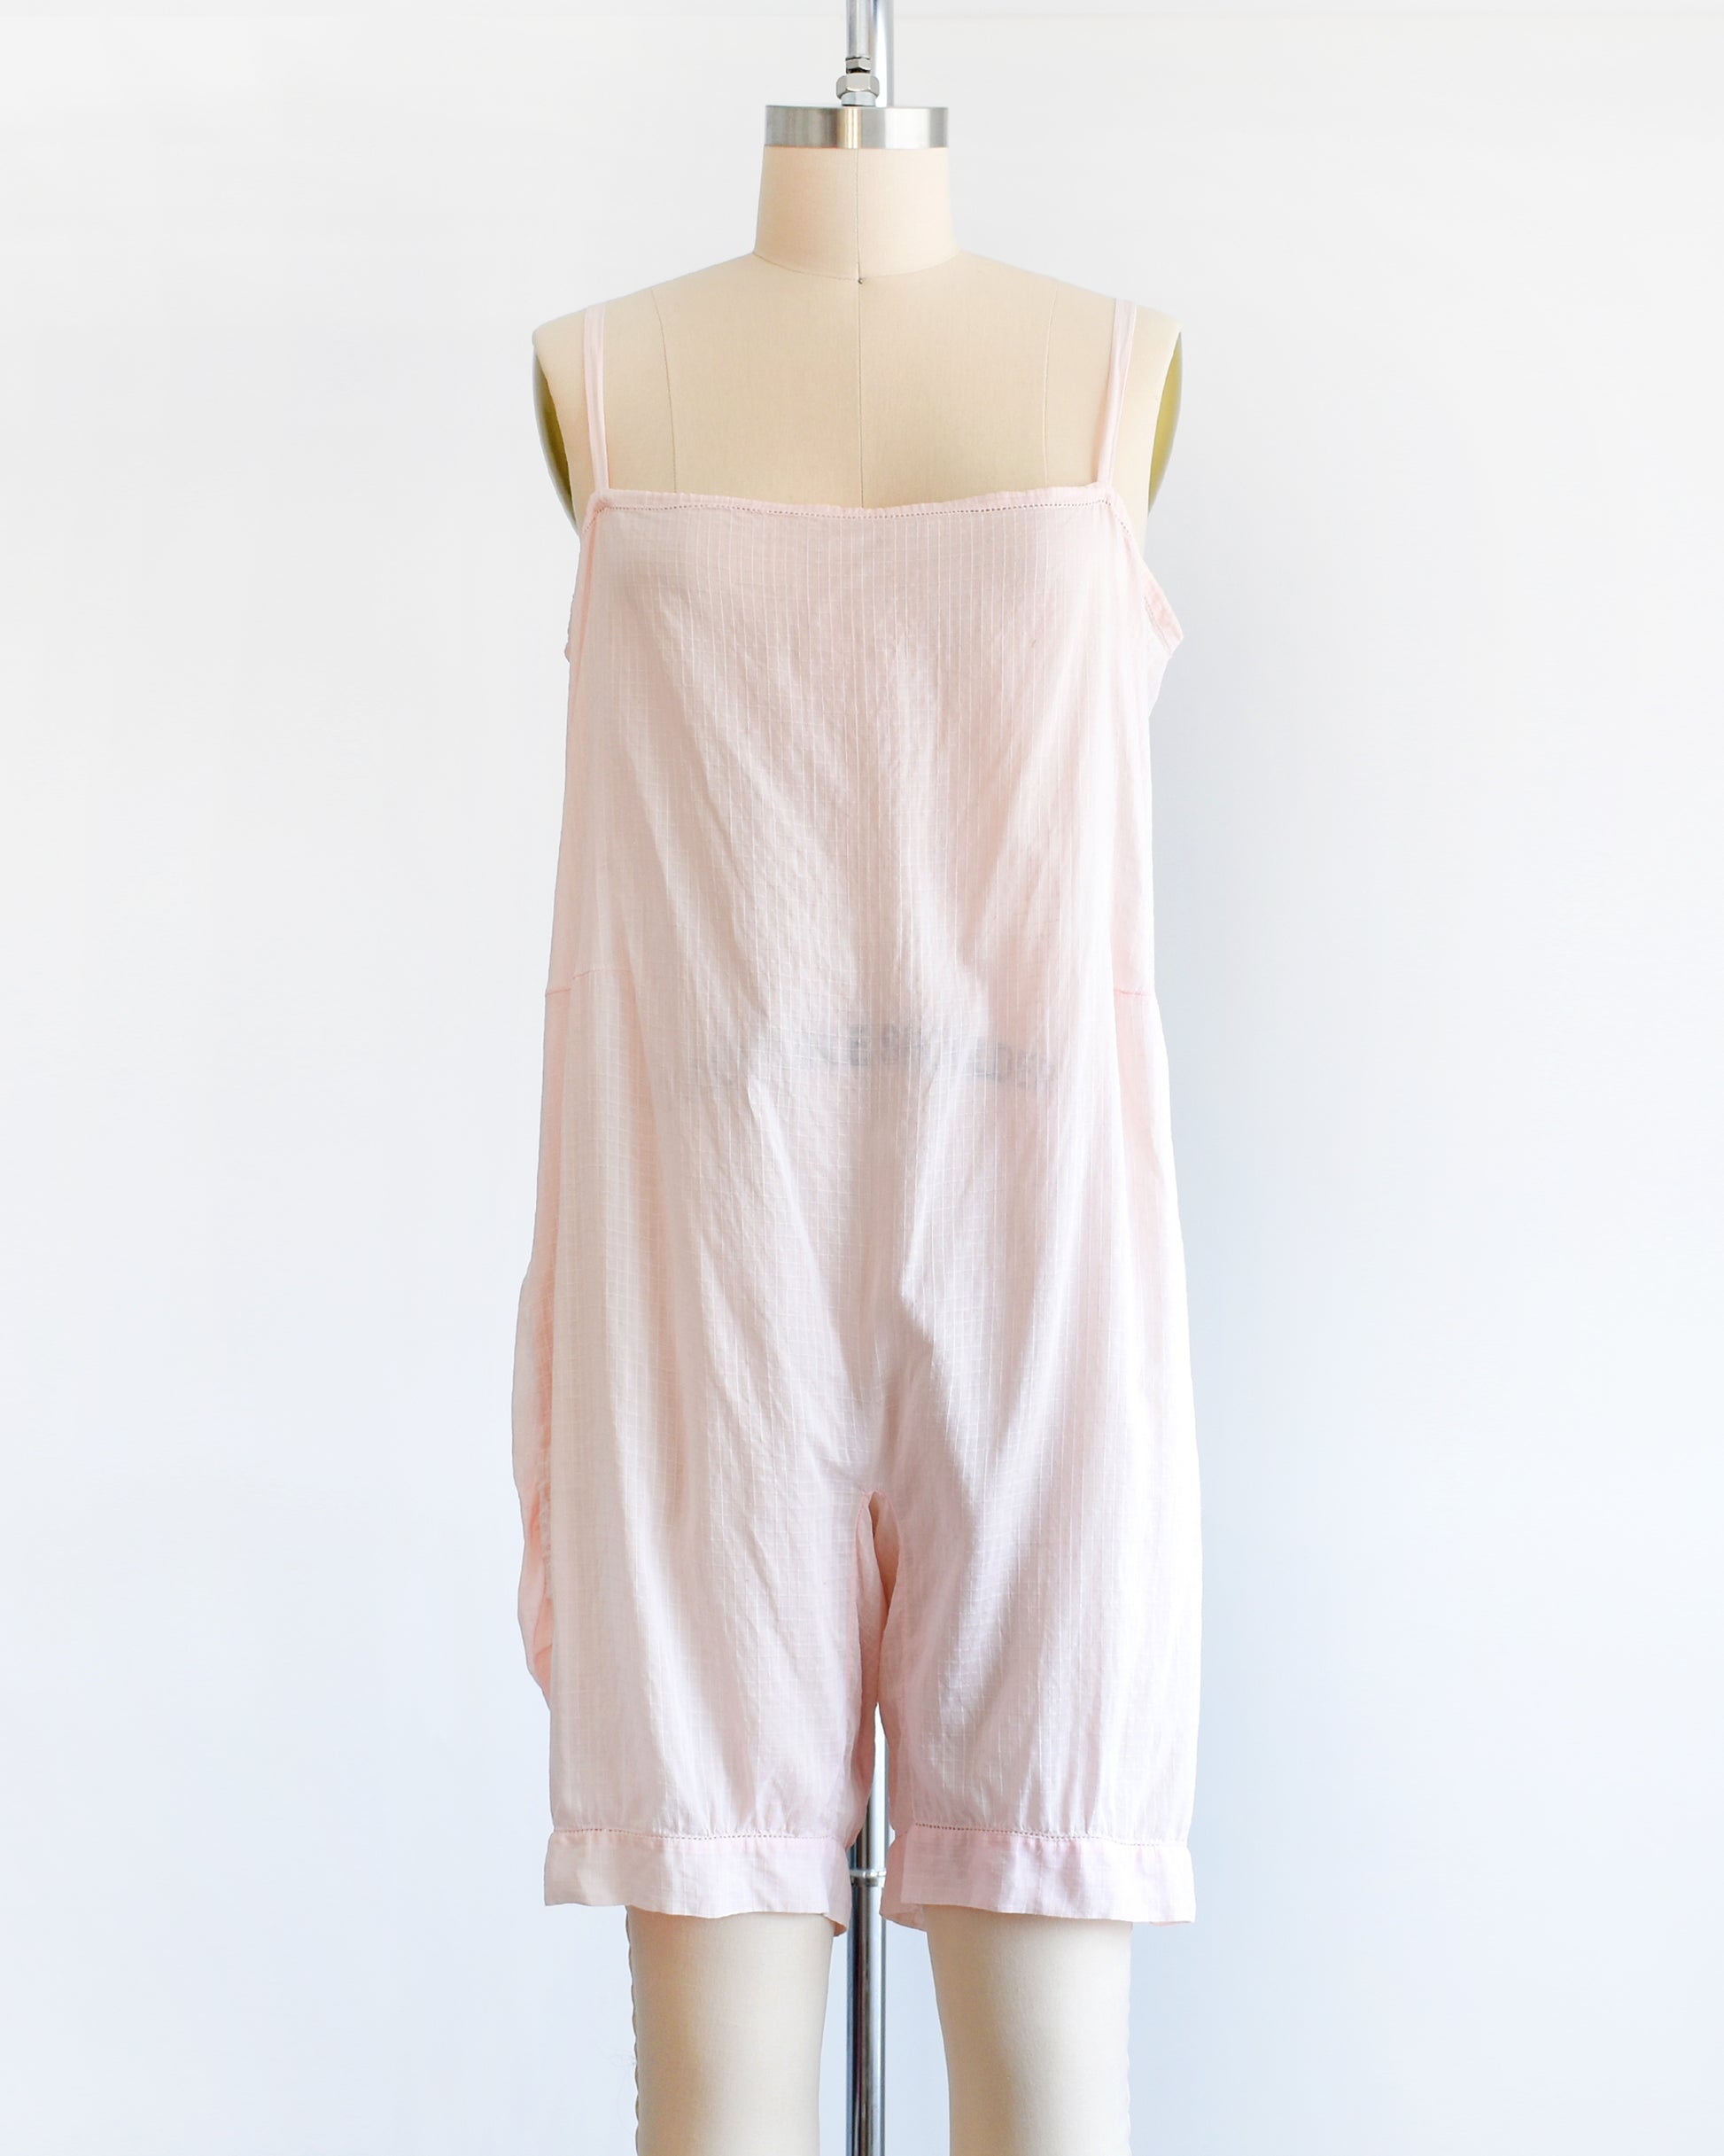 A vintage 1920s light pink chemise step in, which has spaghetti straps, square neckline, and snap buttons on the right side. The garment is on a dress form.